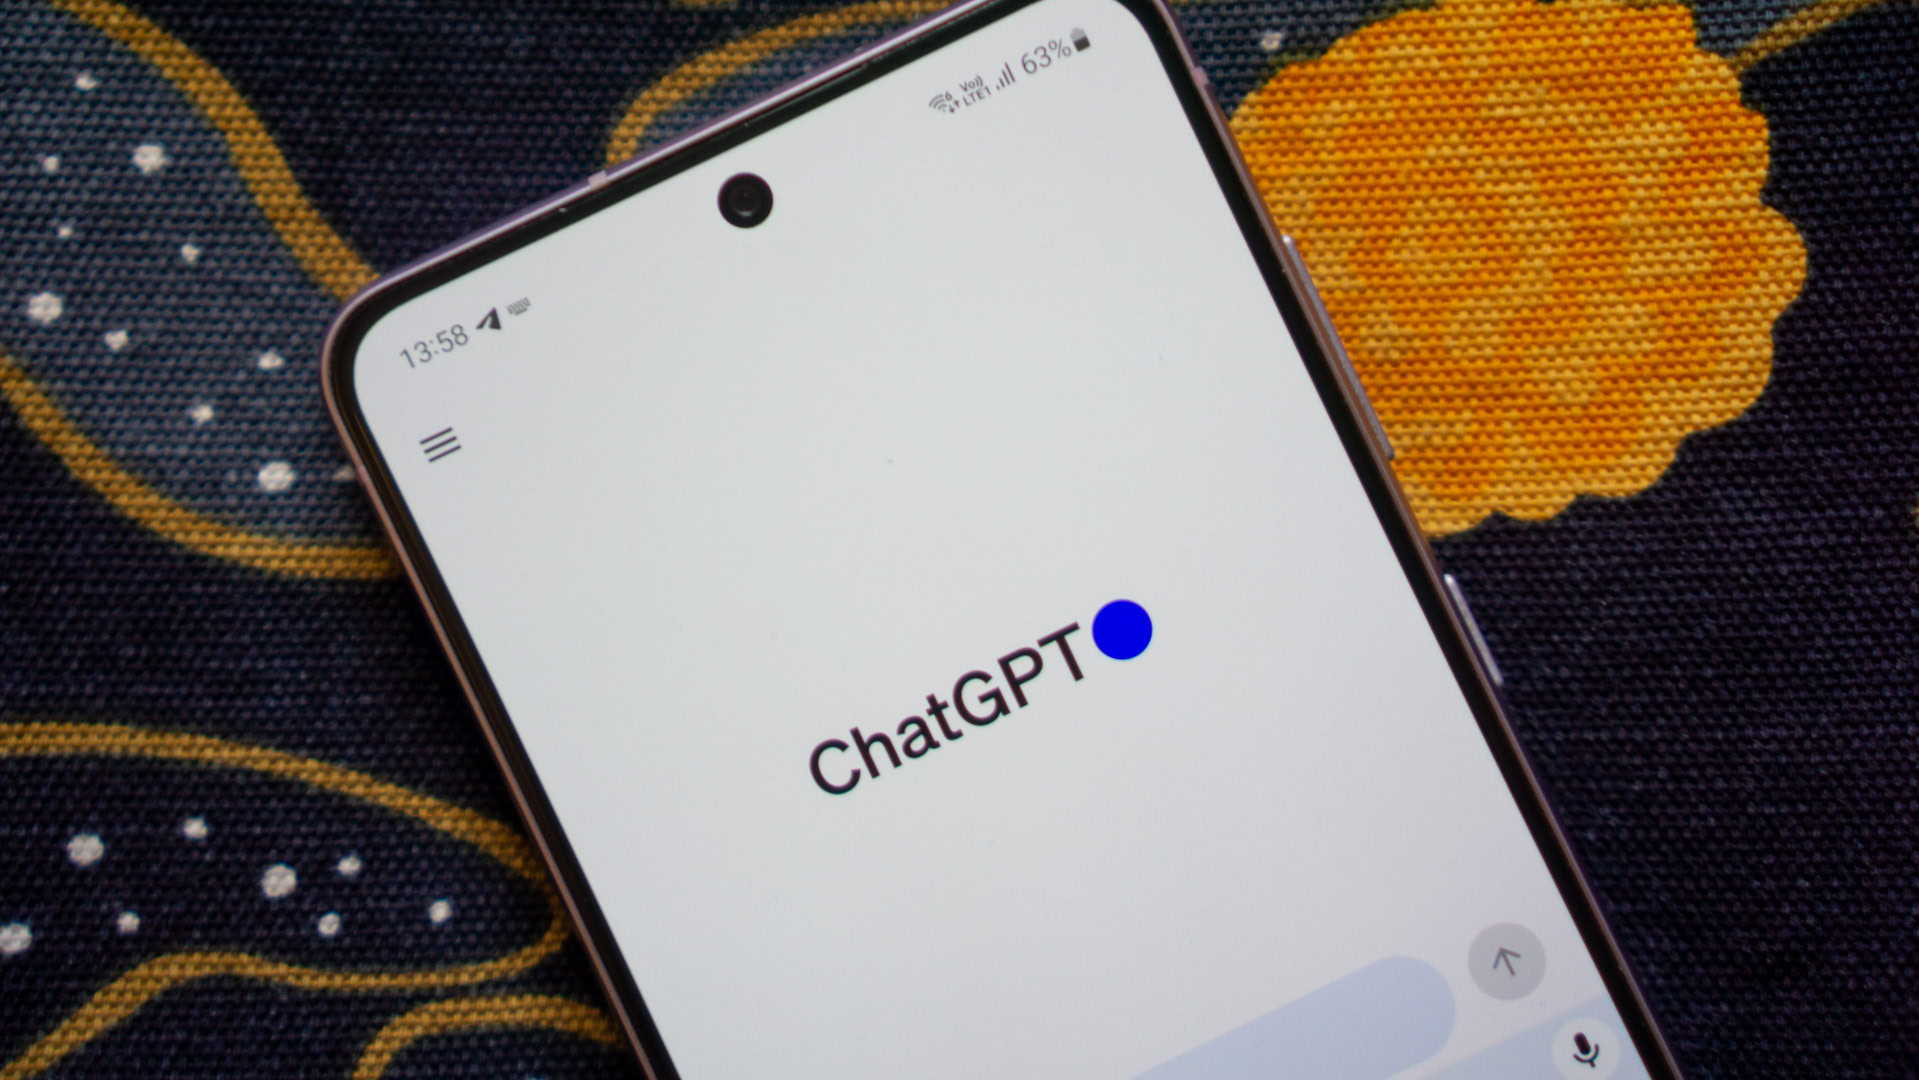 ChatGPT back up after hours long outage, company to share ‘public postmortem’